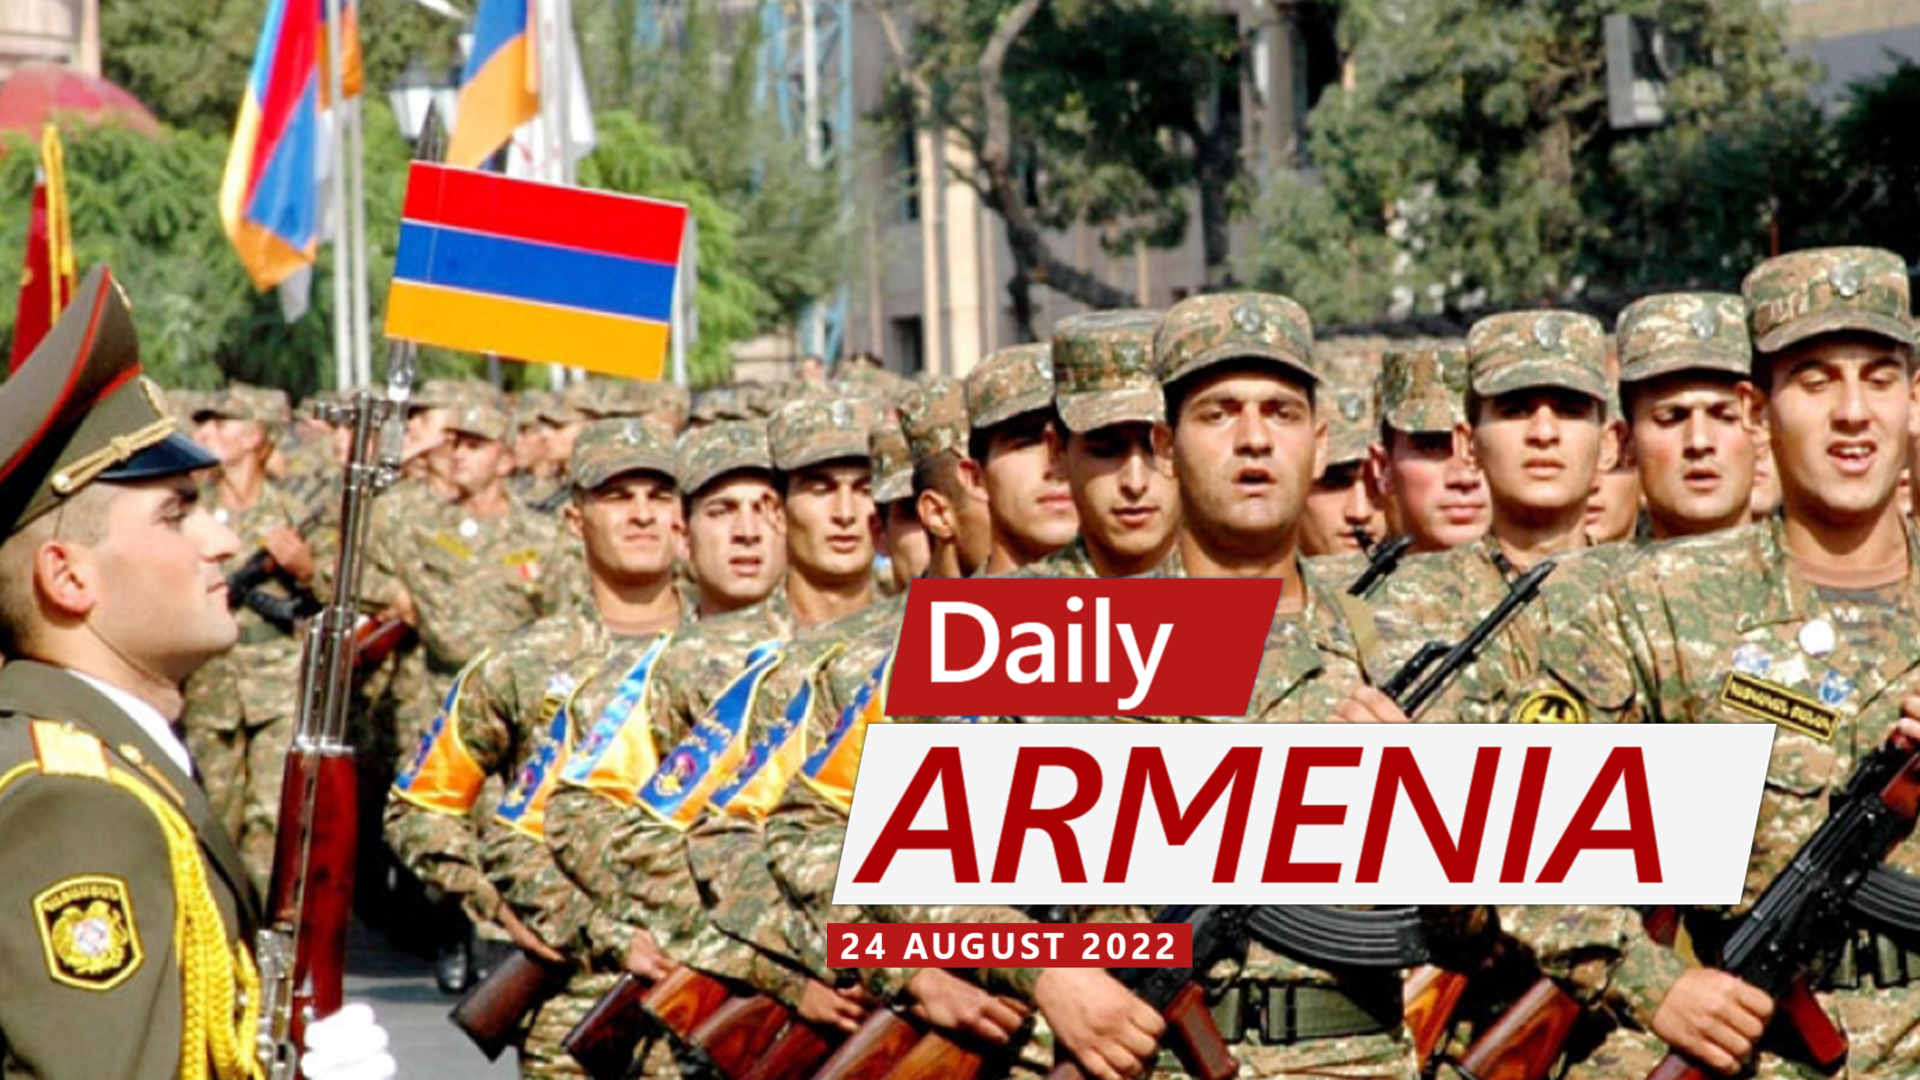 Armenia proposes reduced military service for $60,000 fee